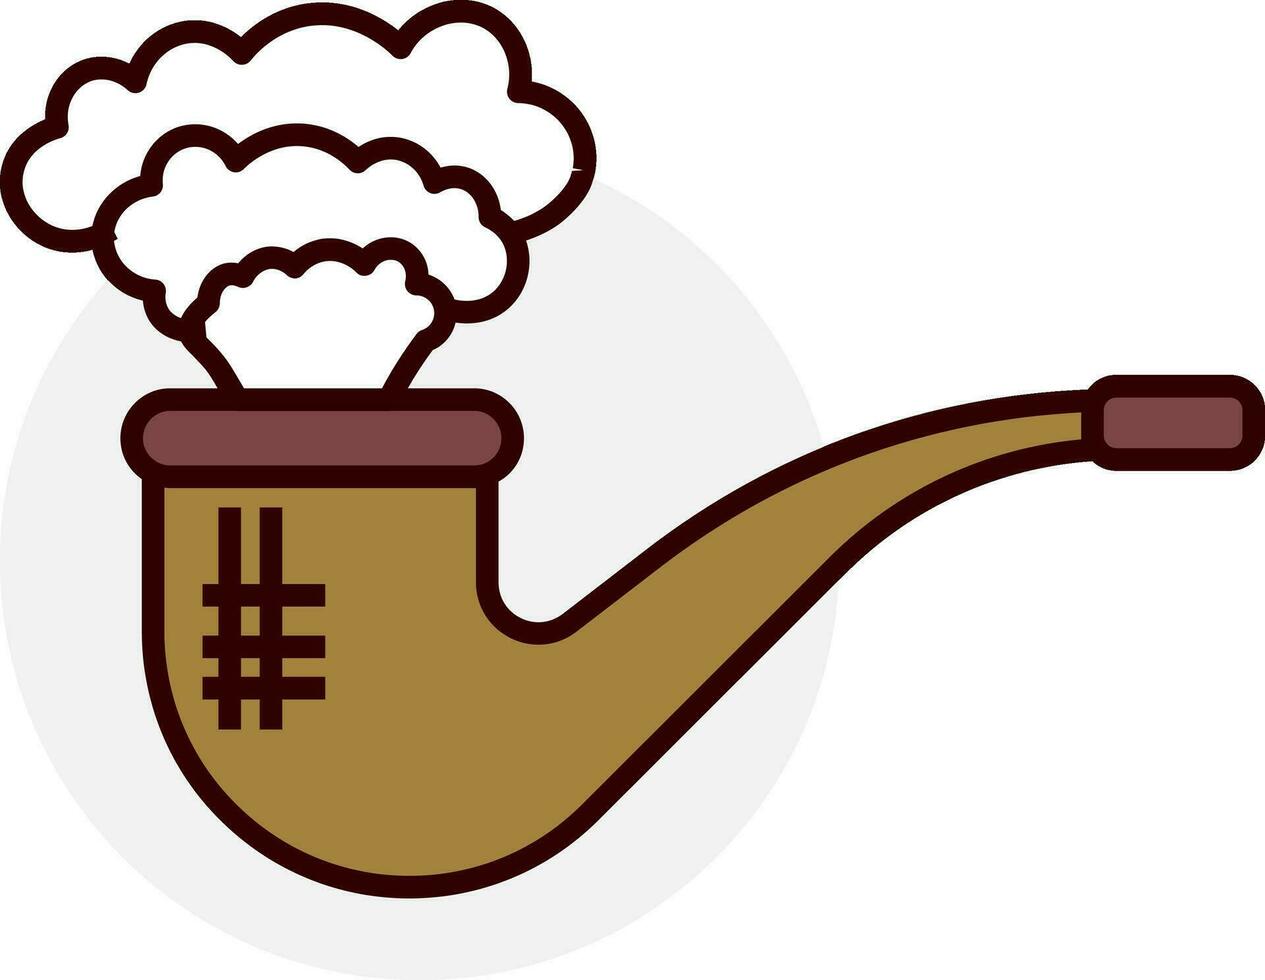 Smoking Pipe icon on grey round shape. vector